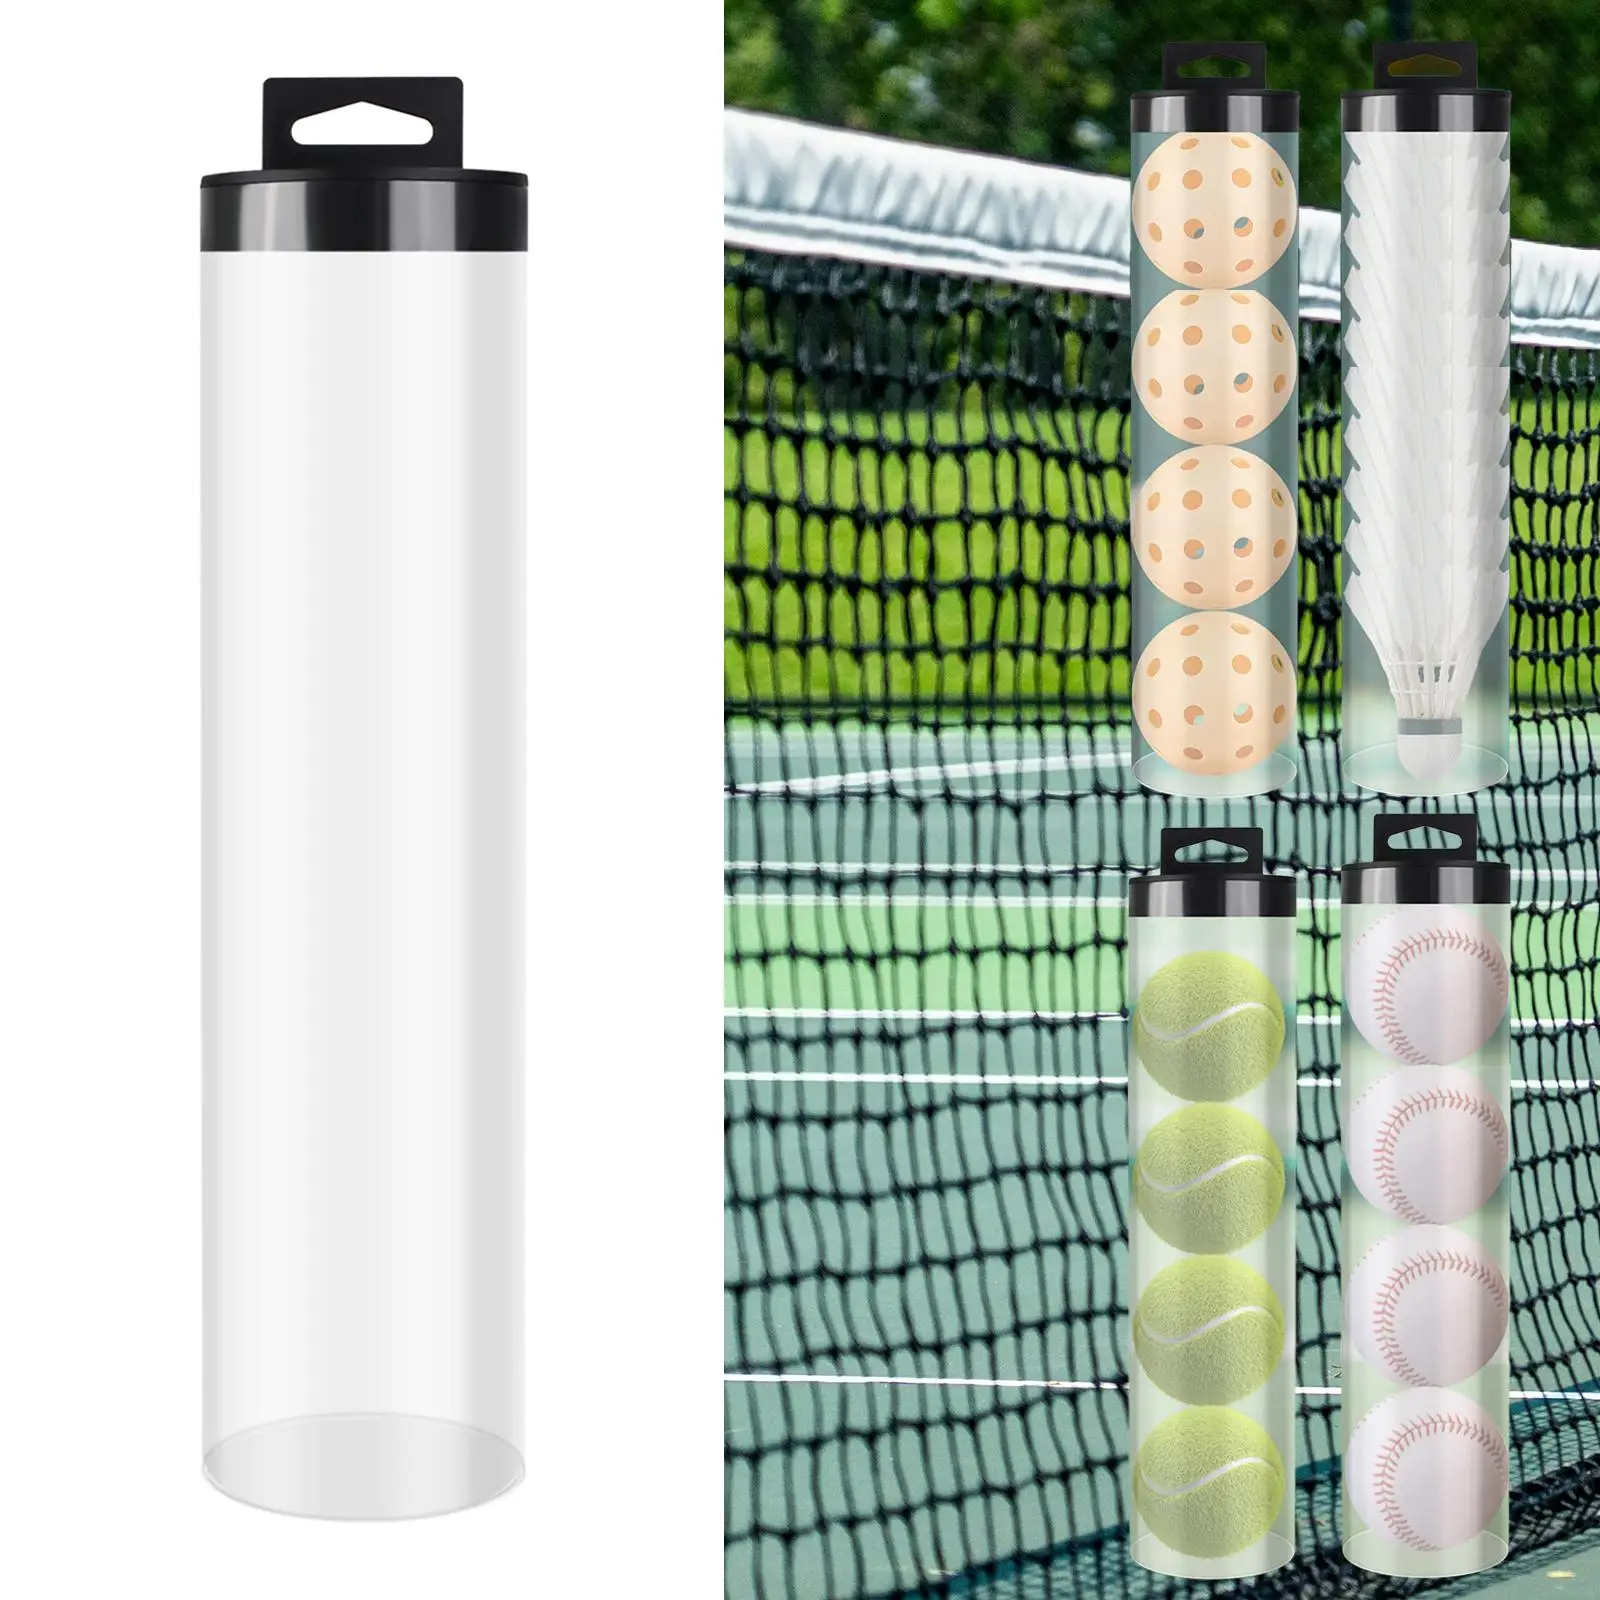 Tennis Ball Can Holder Pickleball Ball Storage Tube Tennis Tube Holds 4 Pickleball Balls Storage Tin for Sports